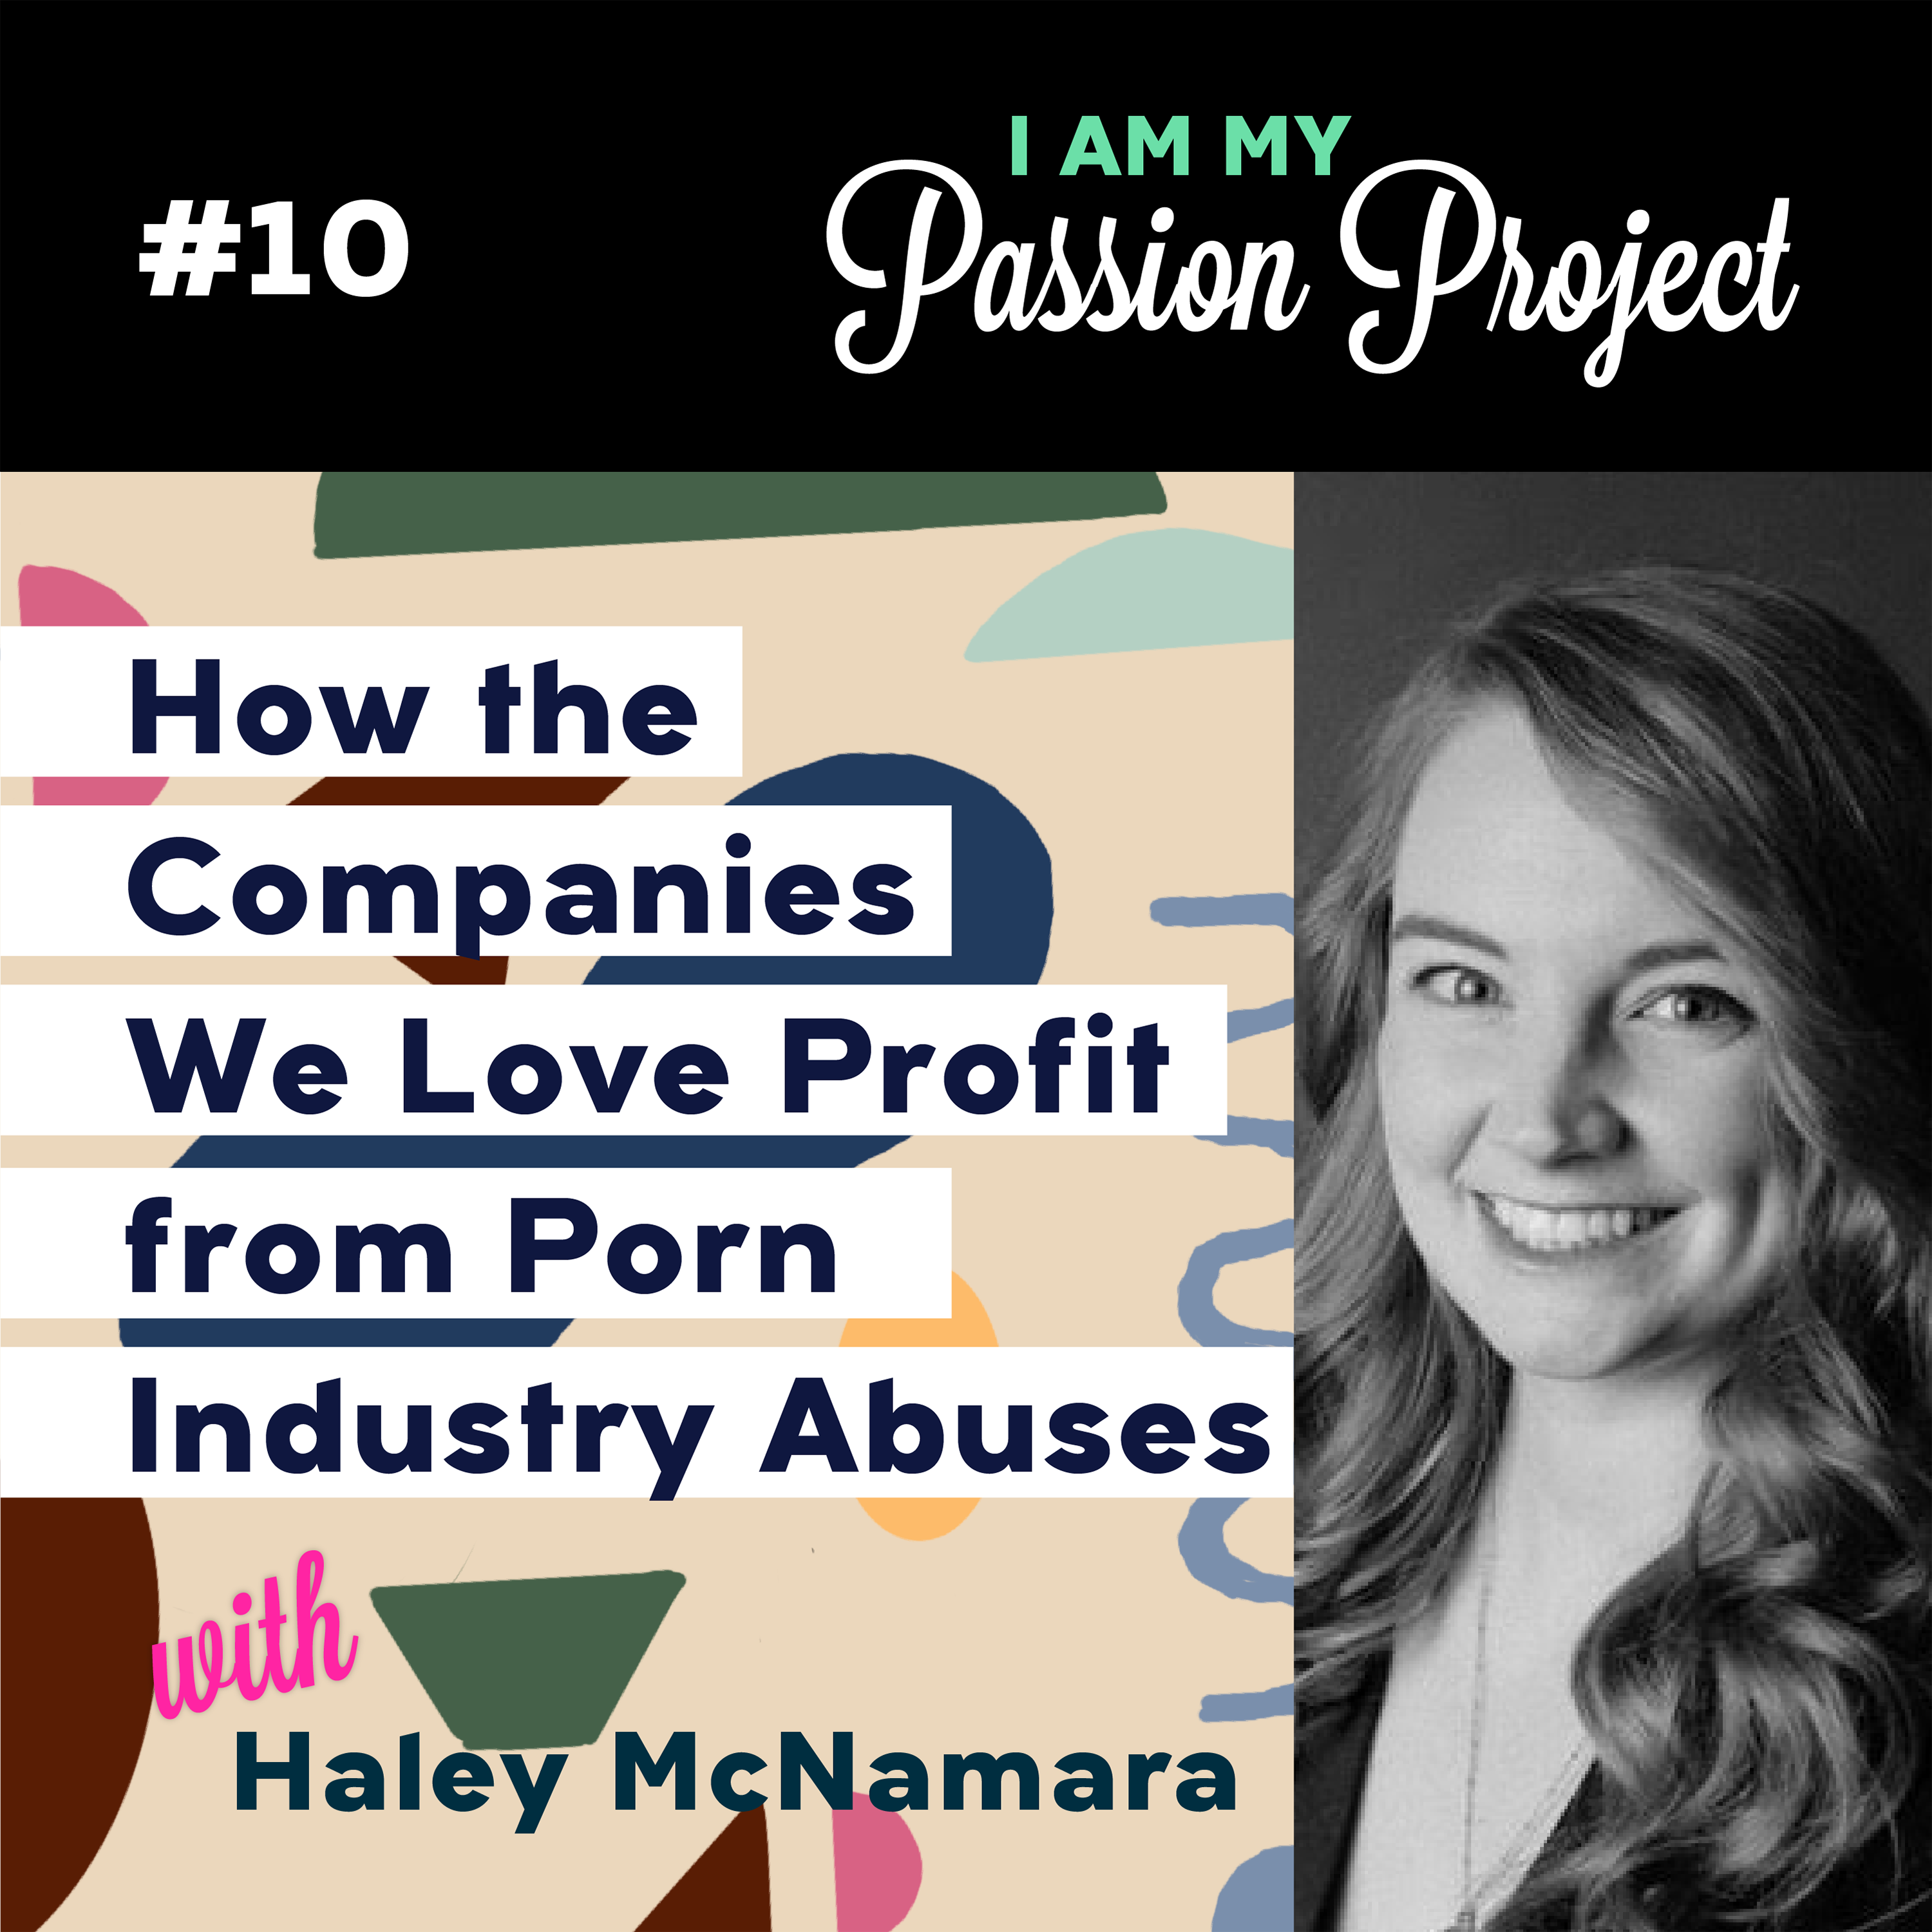 How the Companies We Love Profit from Porn Industry Abuses, with Haley McNamara